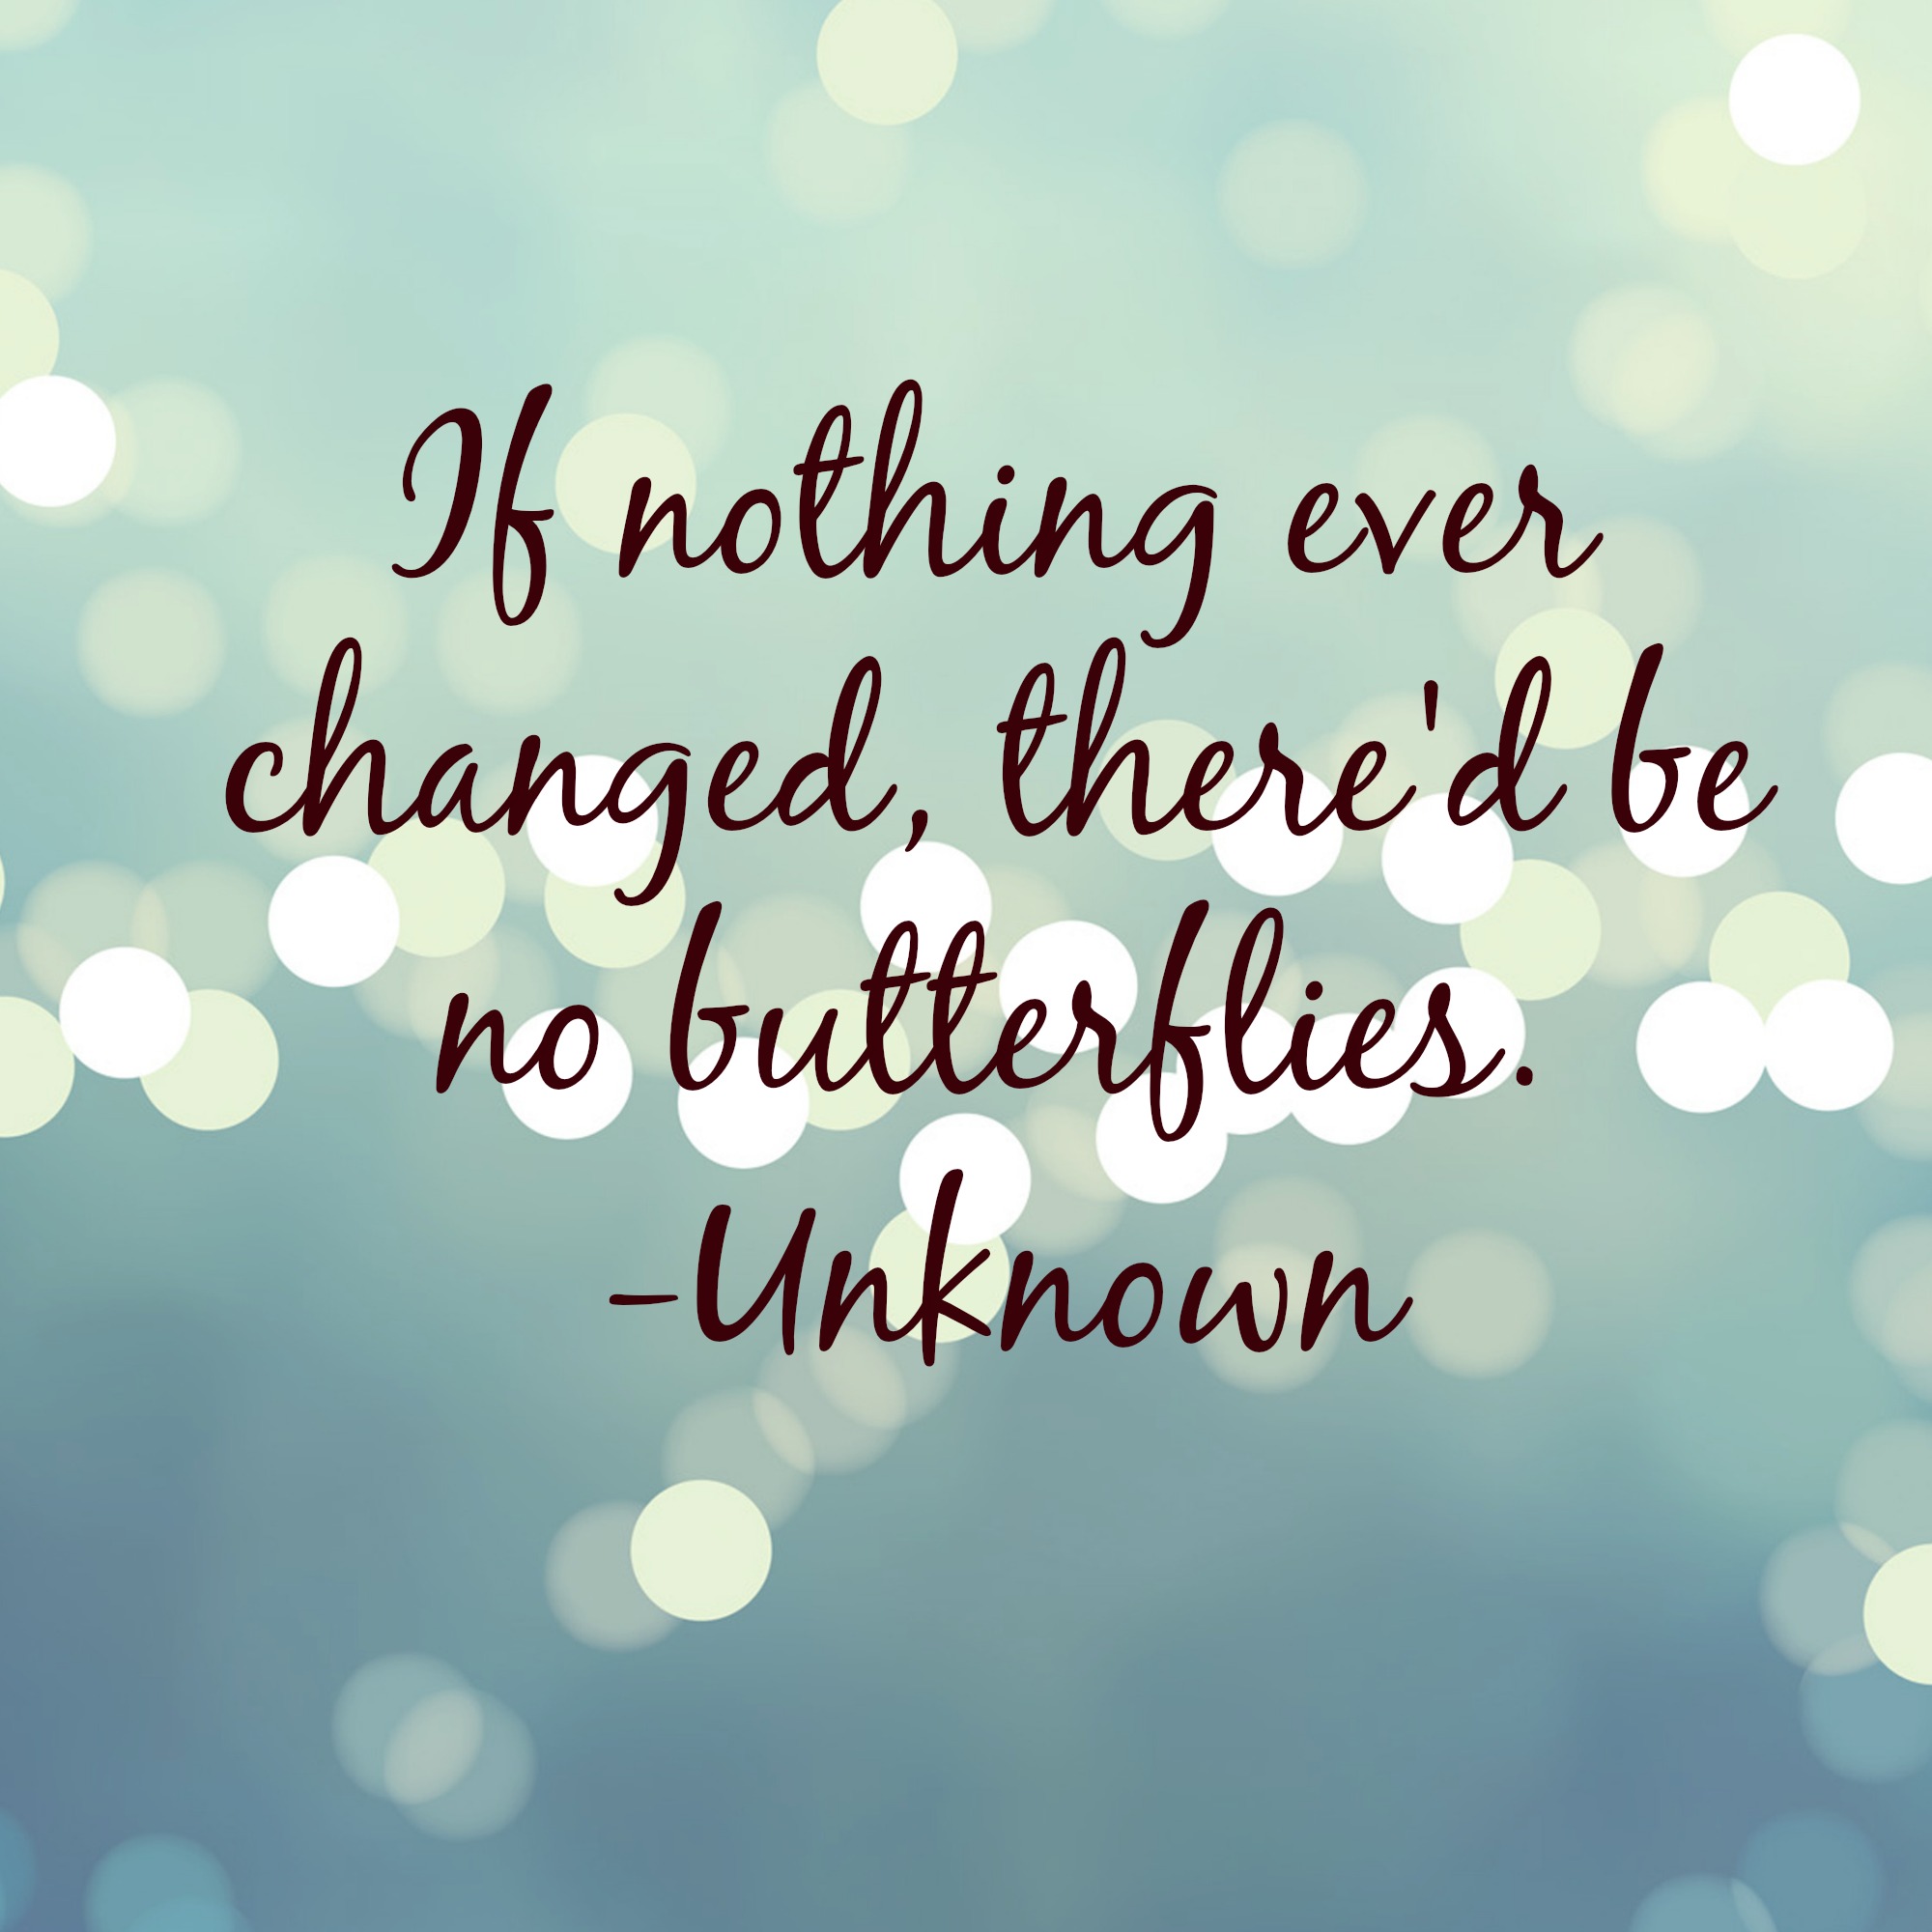 Quotes About Change Inspirational Quotes. QuotesGram